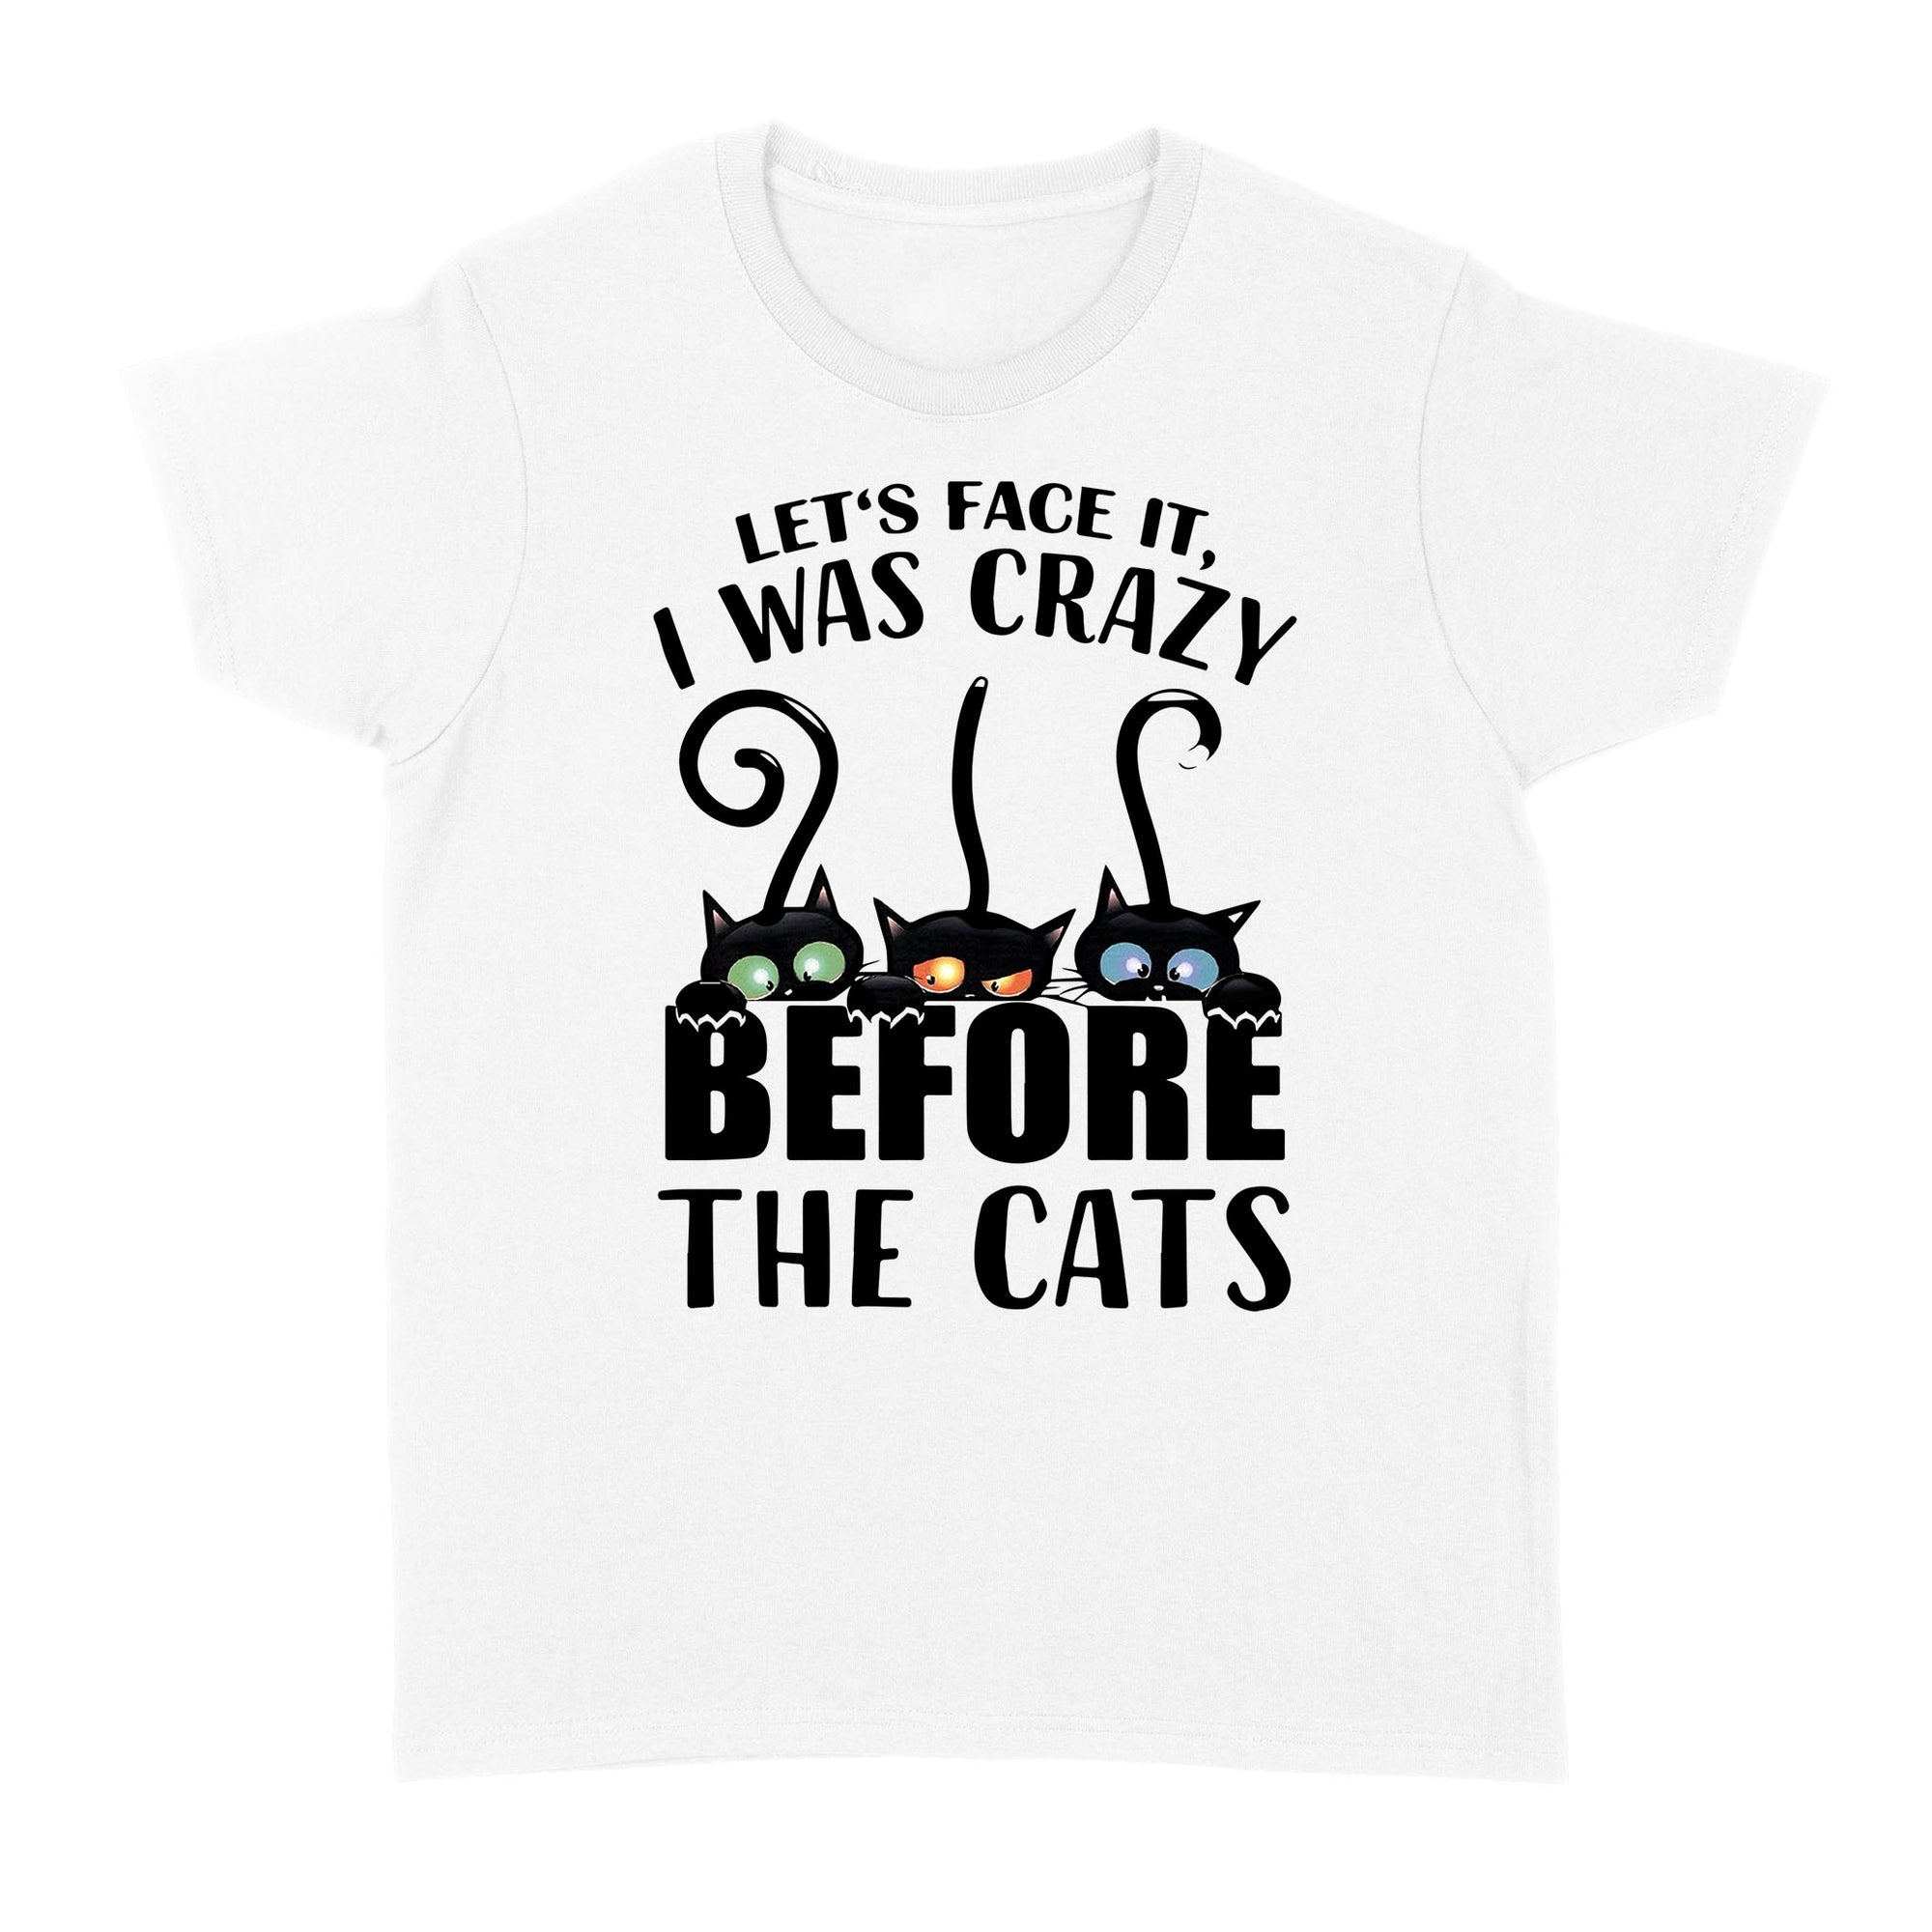 Let's face it i was crazy before the cats Standard Women's T-shirt